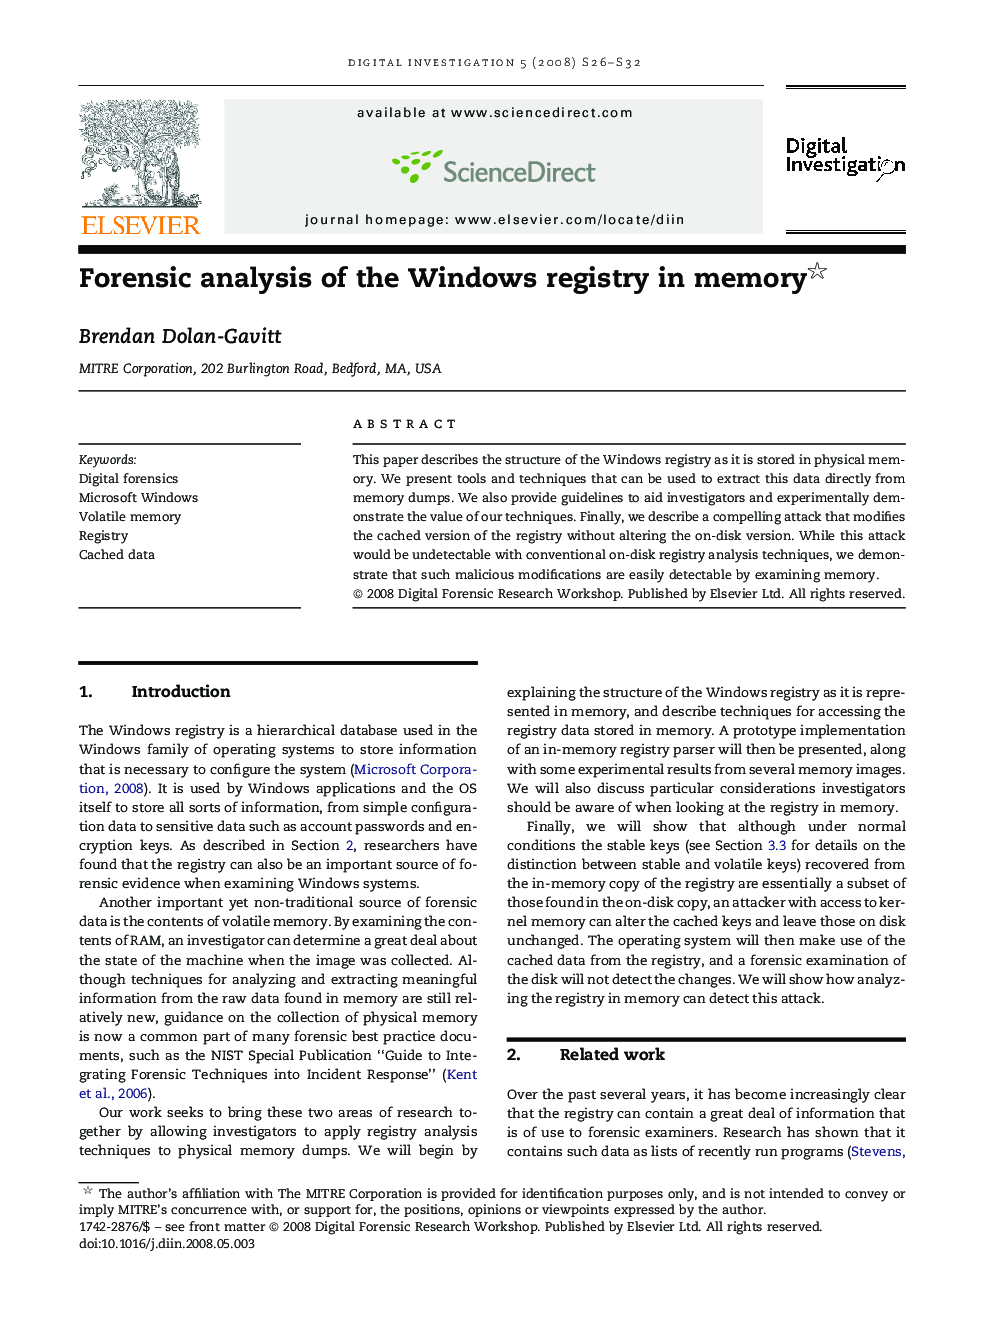 Forensic analysis of the Windows registry in memory 